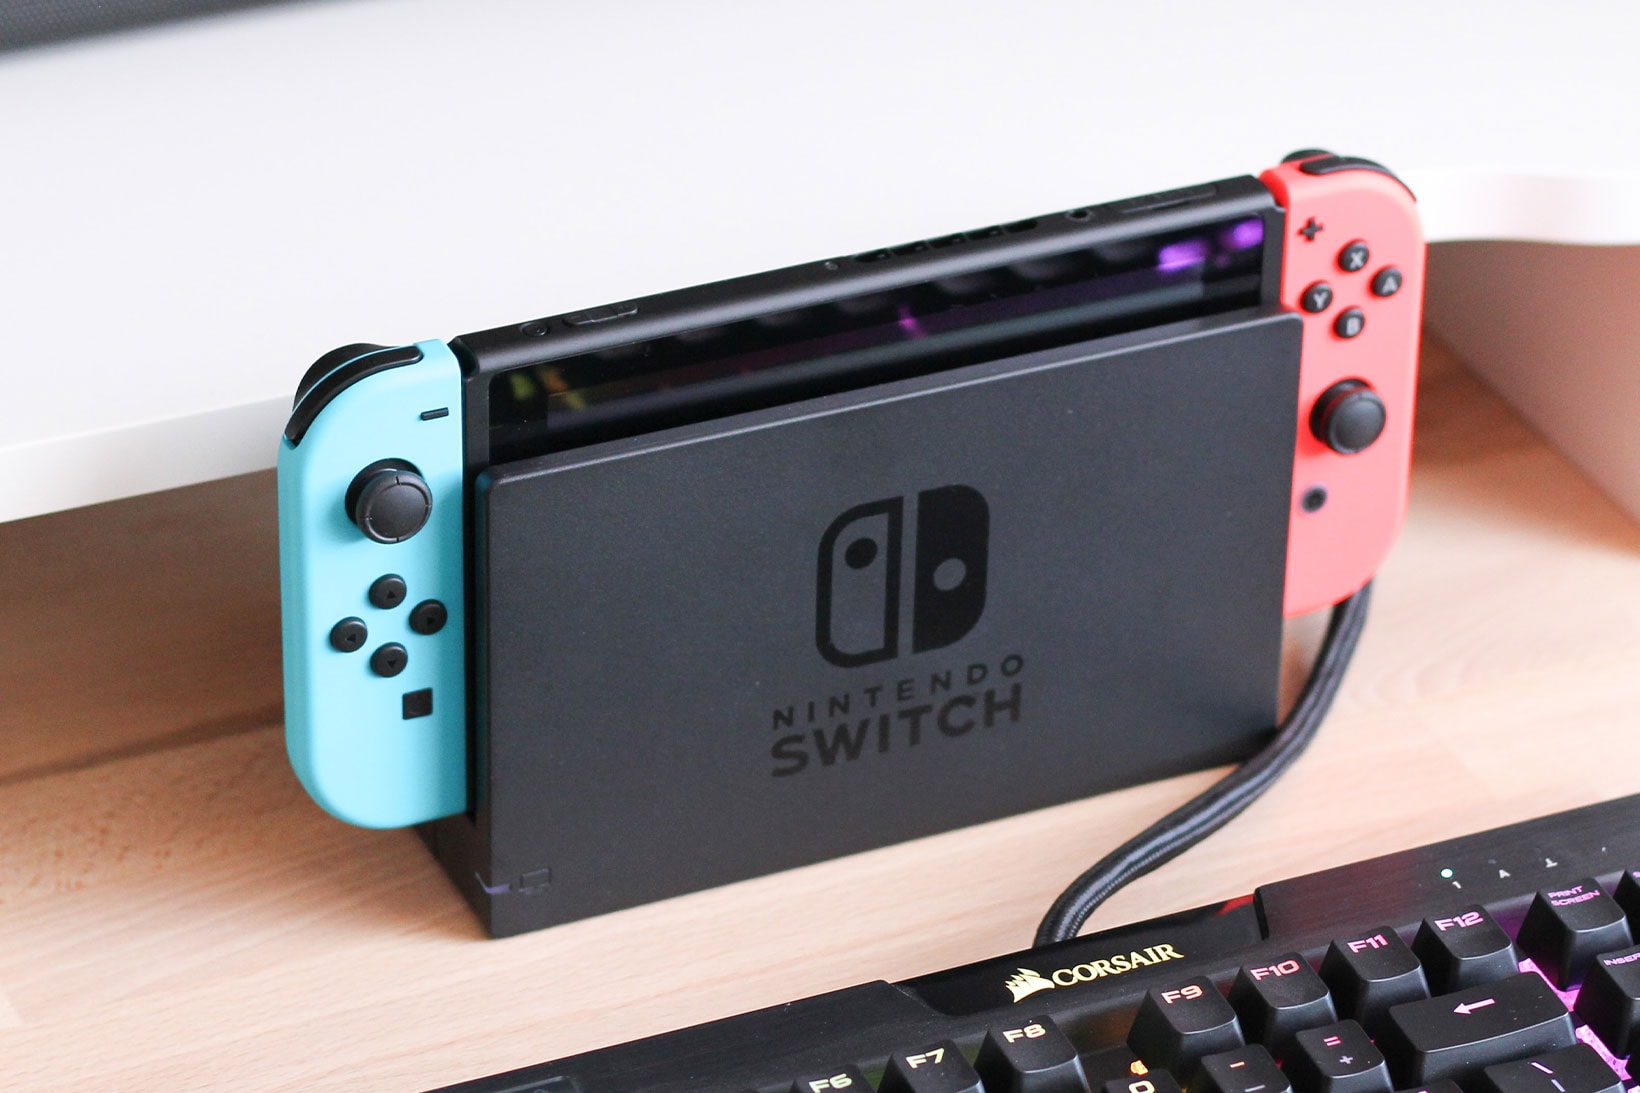 nintendo switch upgrade new gaming console model release info